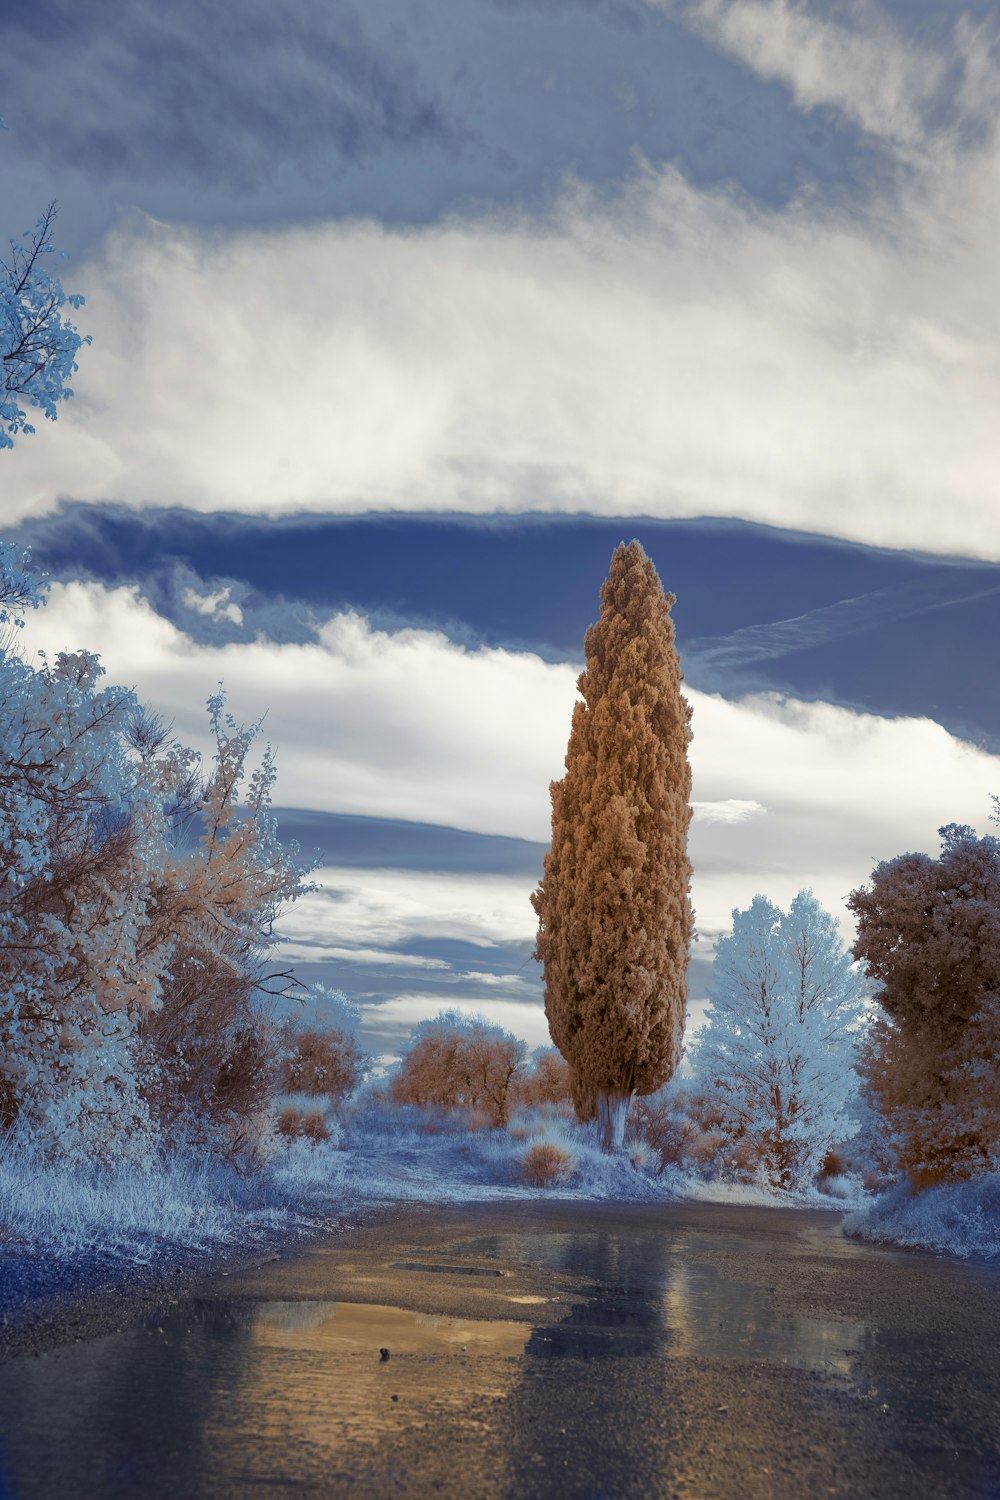 brown tree on snow covered ground under blue and white cloudy sky during daytime